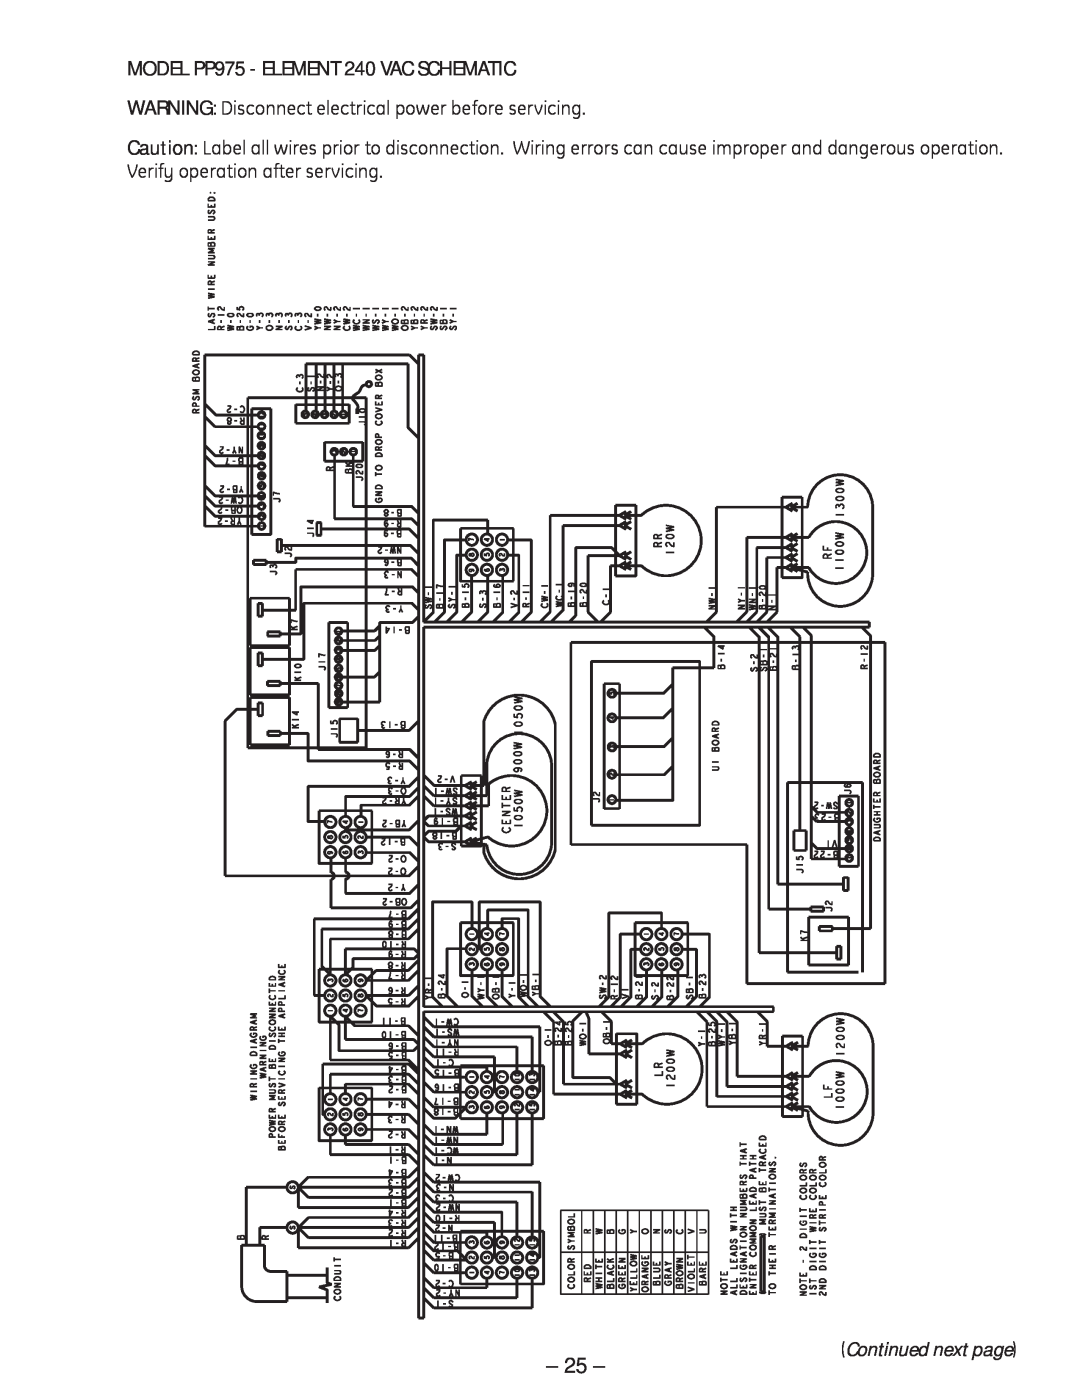 GE PP945 manual MODEL PP975 - ELEMENT 240 VAC SCHEMATIC, WARNING Disconnect electrical power before servicing 